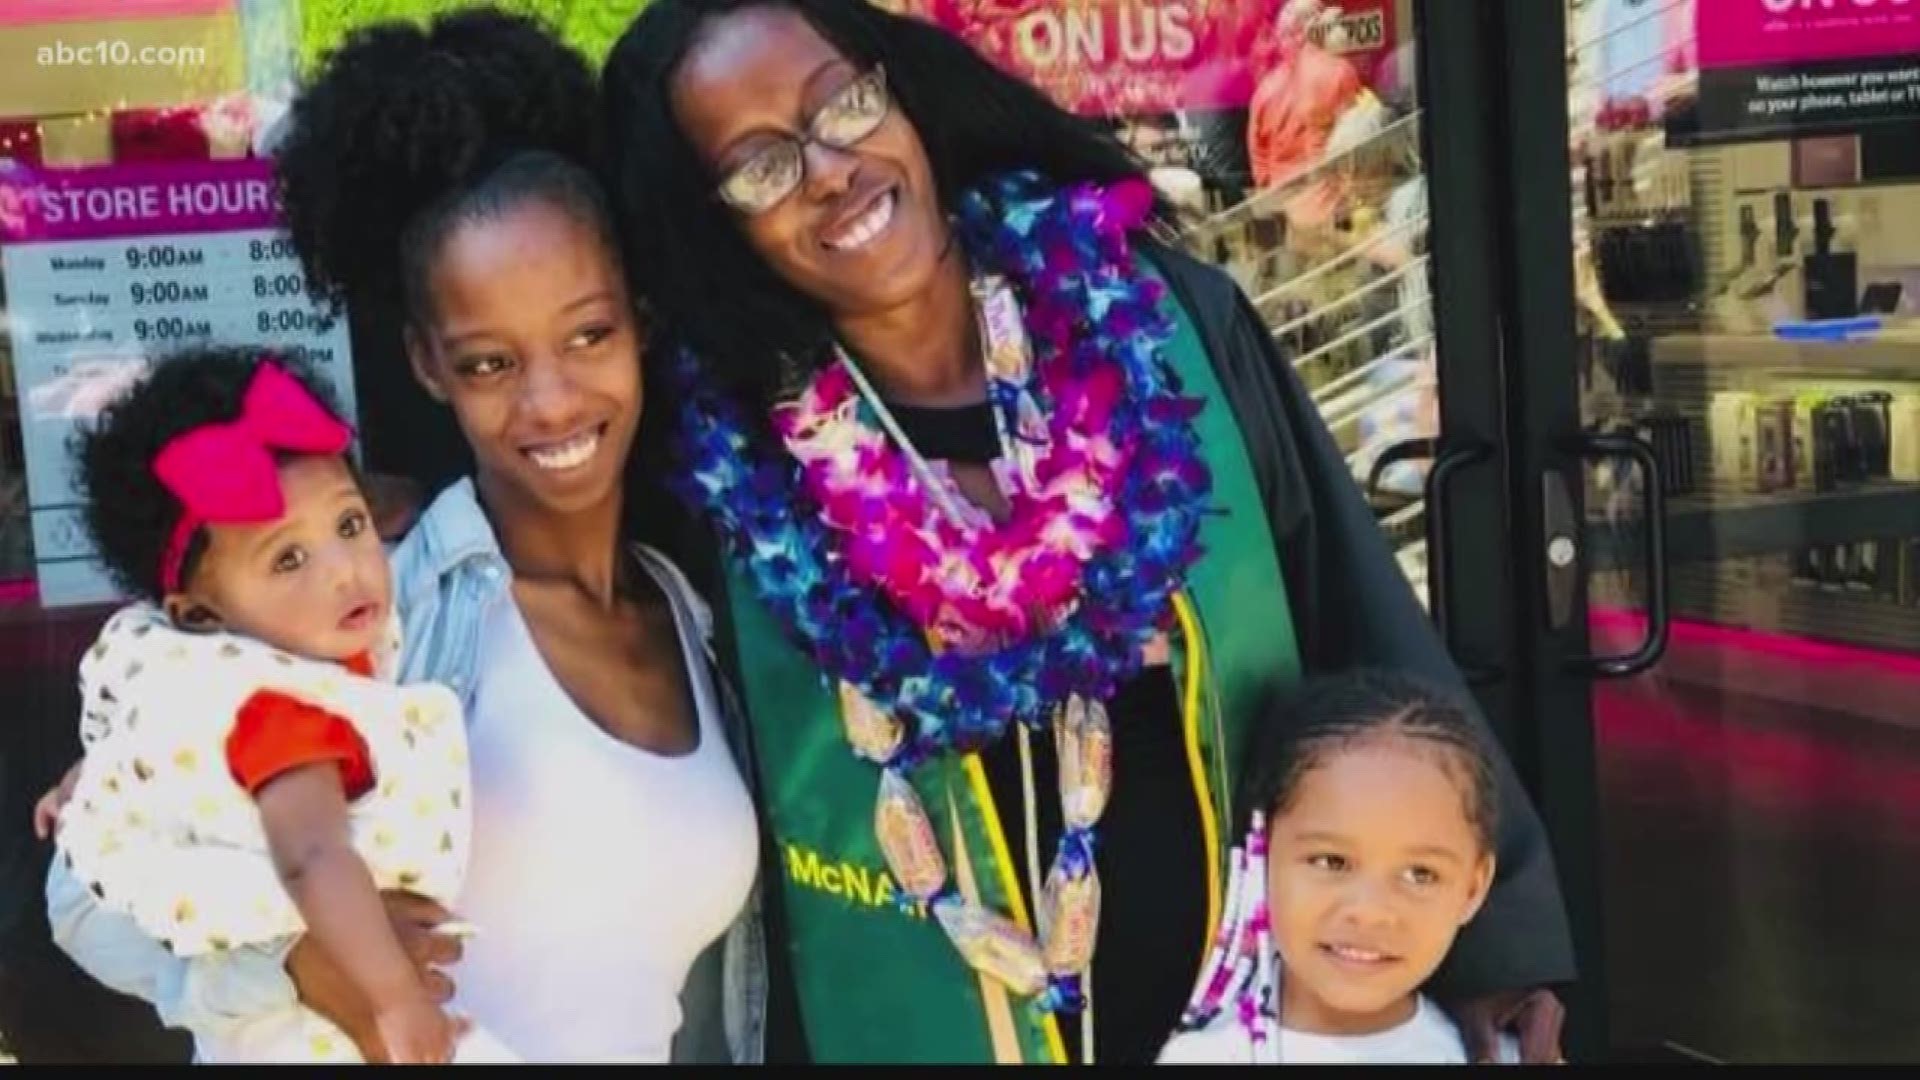 A 46-year-old former convicted criminal is setting her goal toward social work after completing her undergraduate studies at California State University Sacramento.